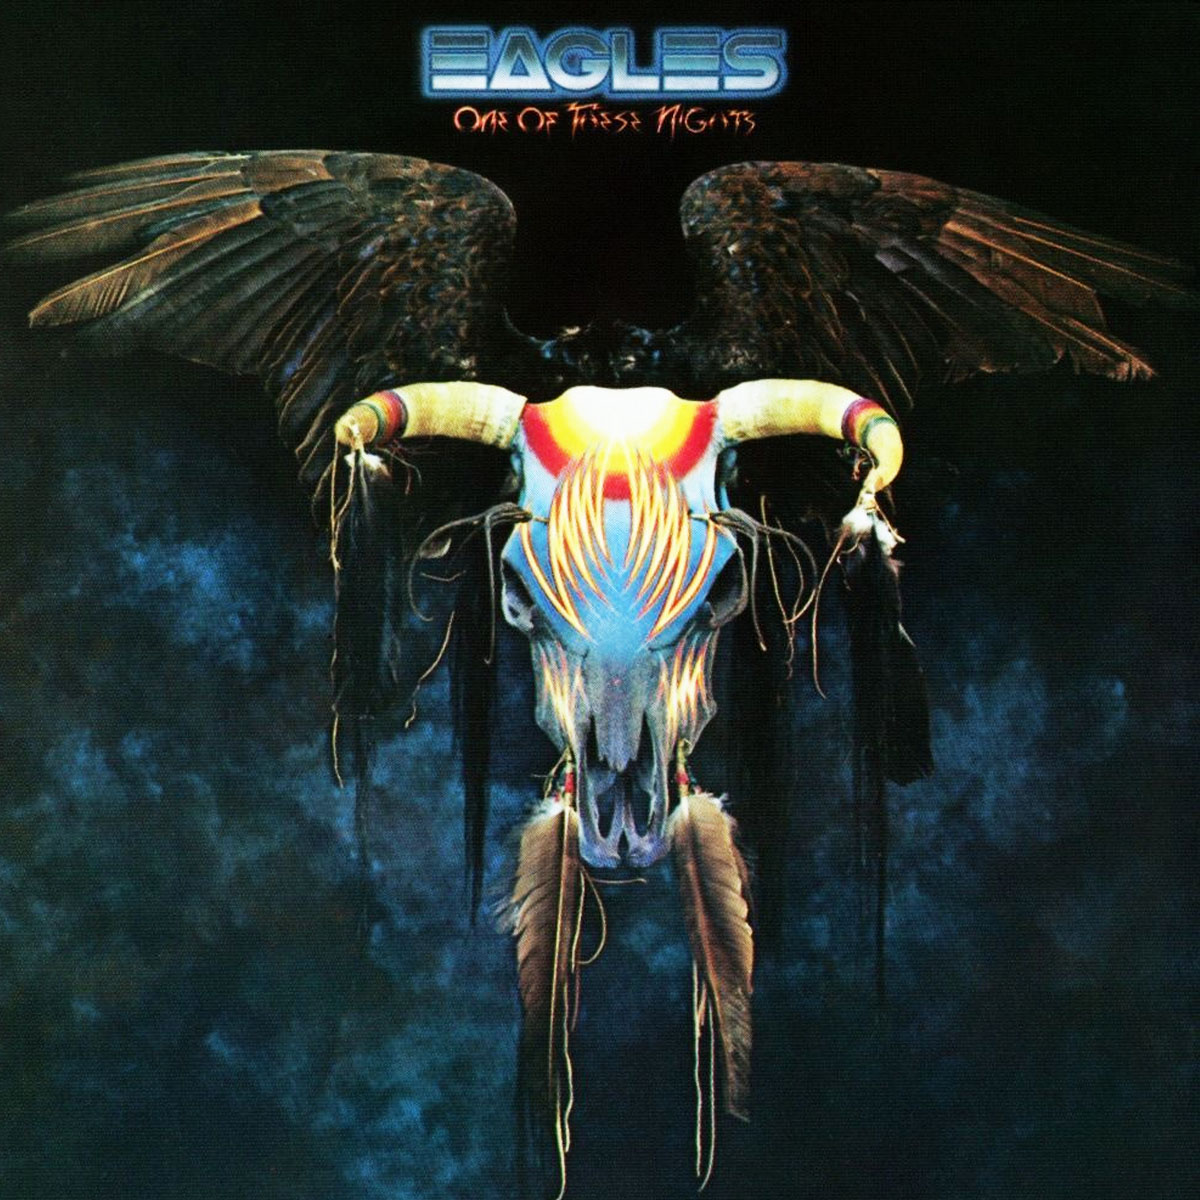 One of These Nights" (1975) by The Eagles